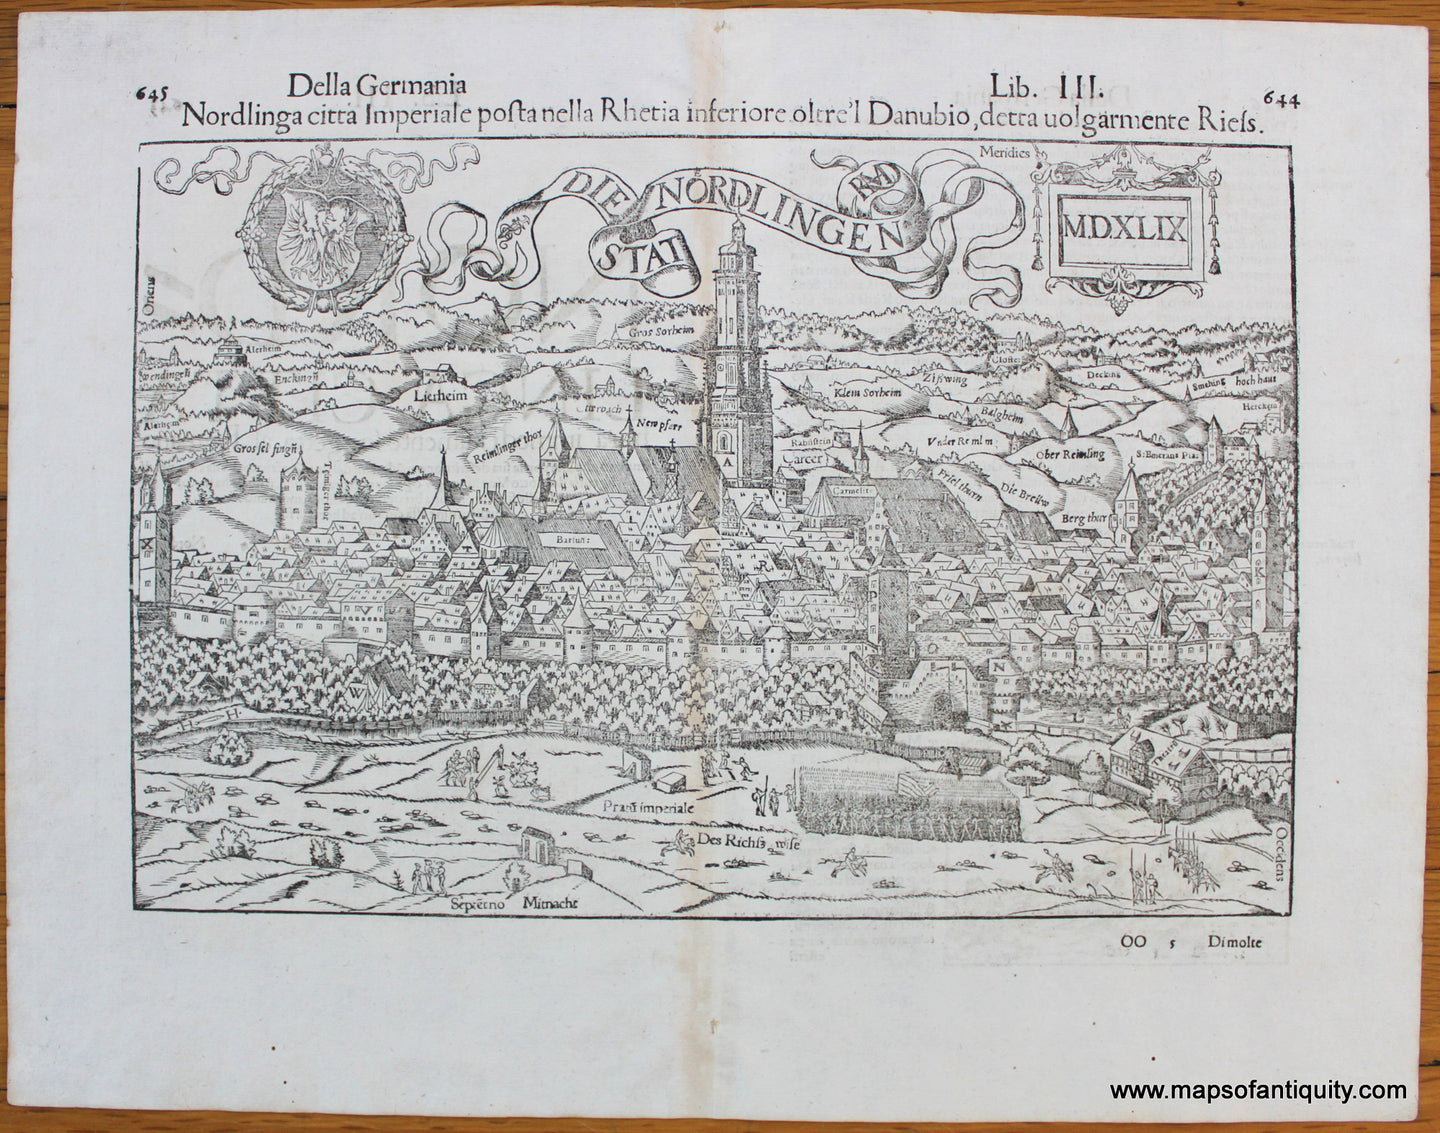 Antique-Black-and-White-Map-Die-Stat-Nordlingen-(MDXLIX)-******-Europe-Germany-1548-Munster-Maps-Of-Antiquity